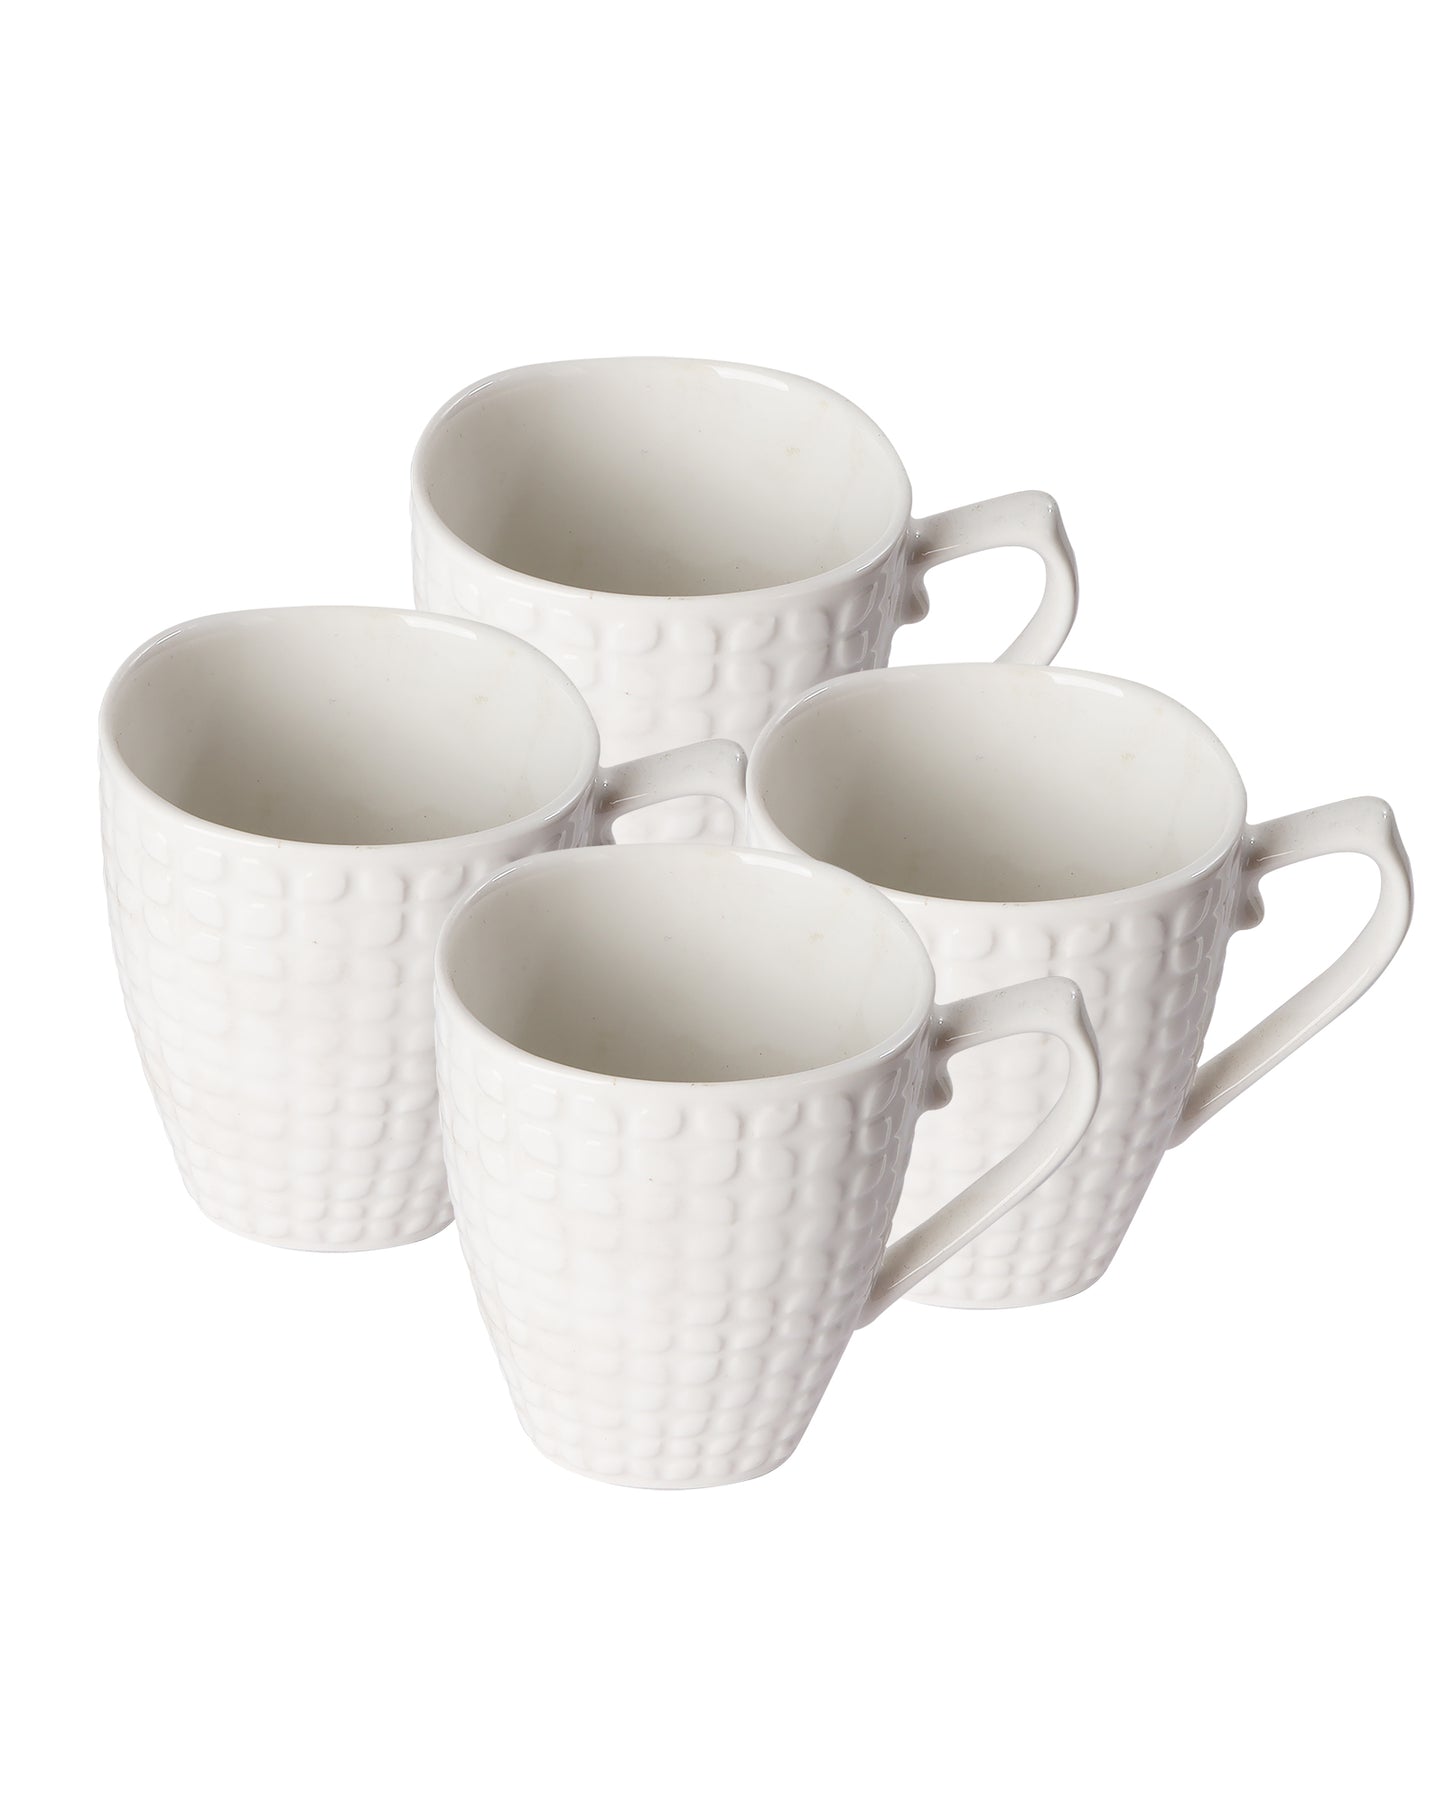 Premium Porcelain Mug with Large Handle for Coffee Tea Cocoa Soup, Ceramic, Dishwasher & Microwave Safe, Dotted Expresso, White, set of 4